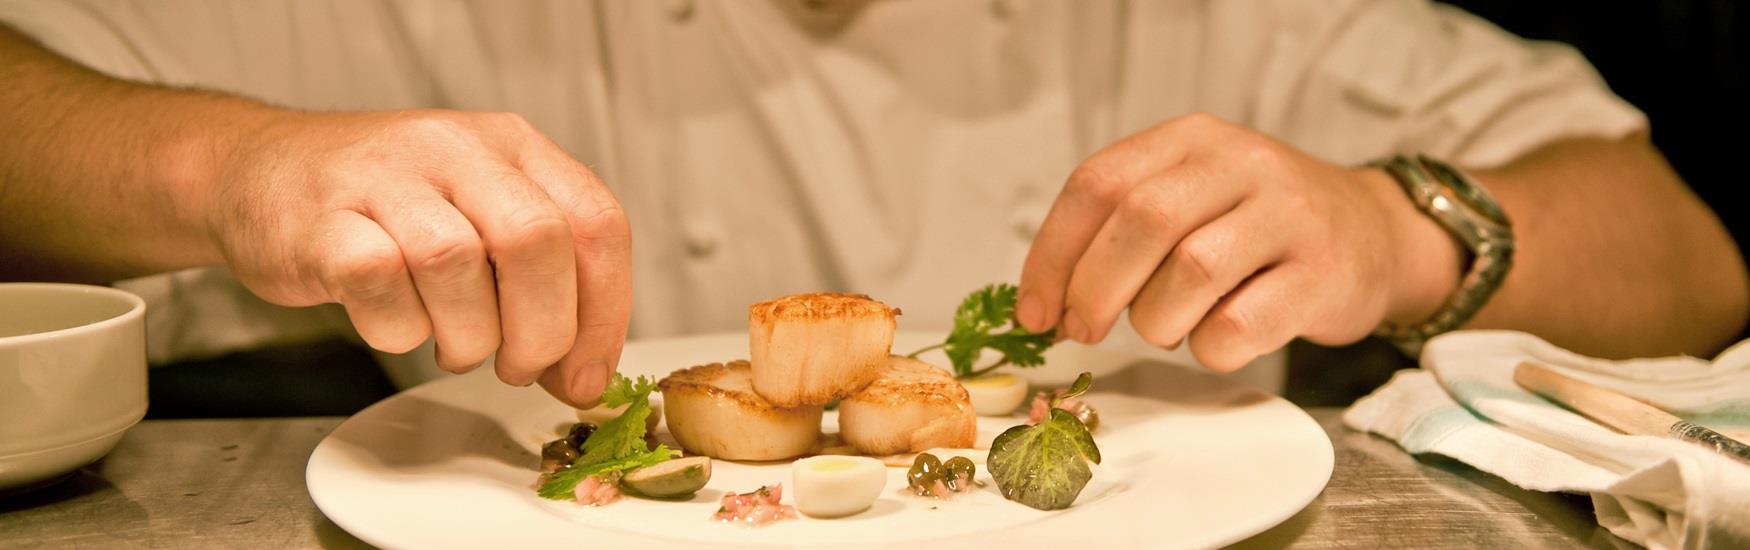 Chef's hands assembling scallops to serve